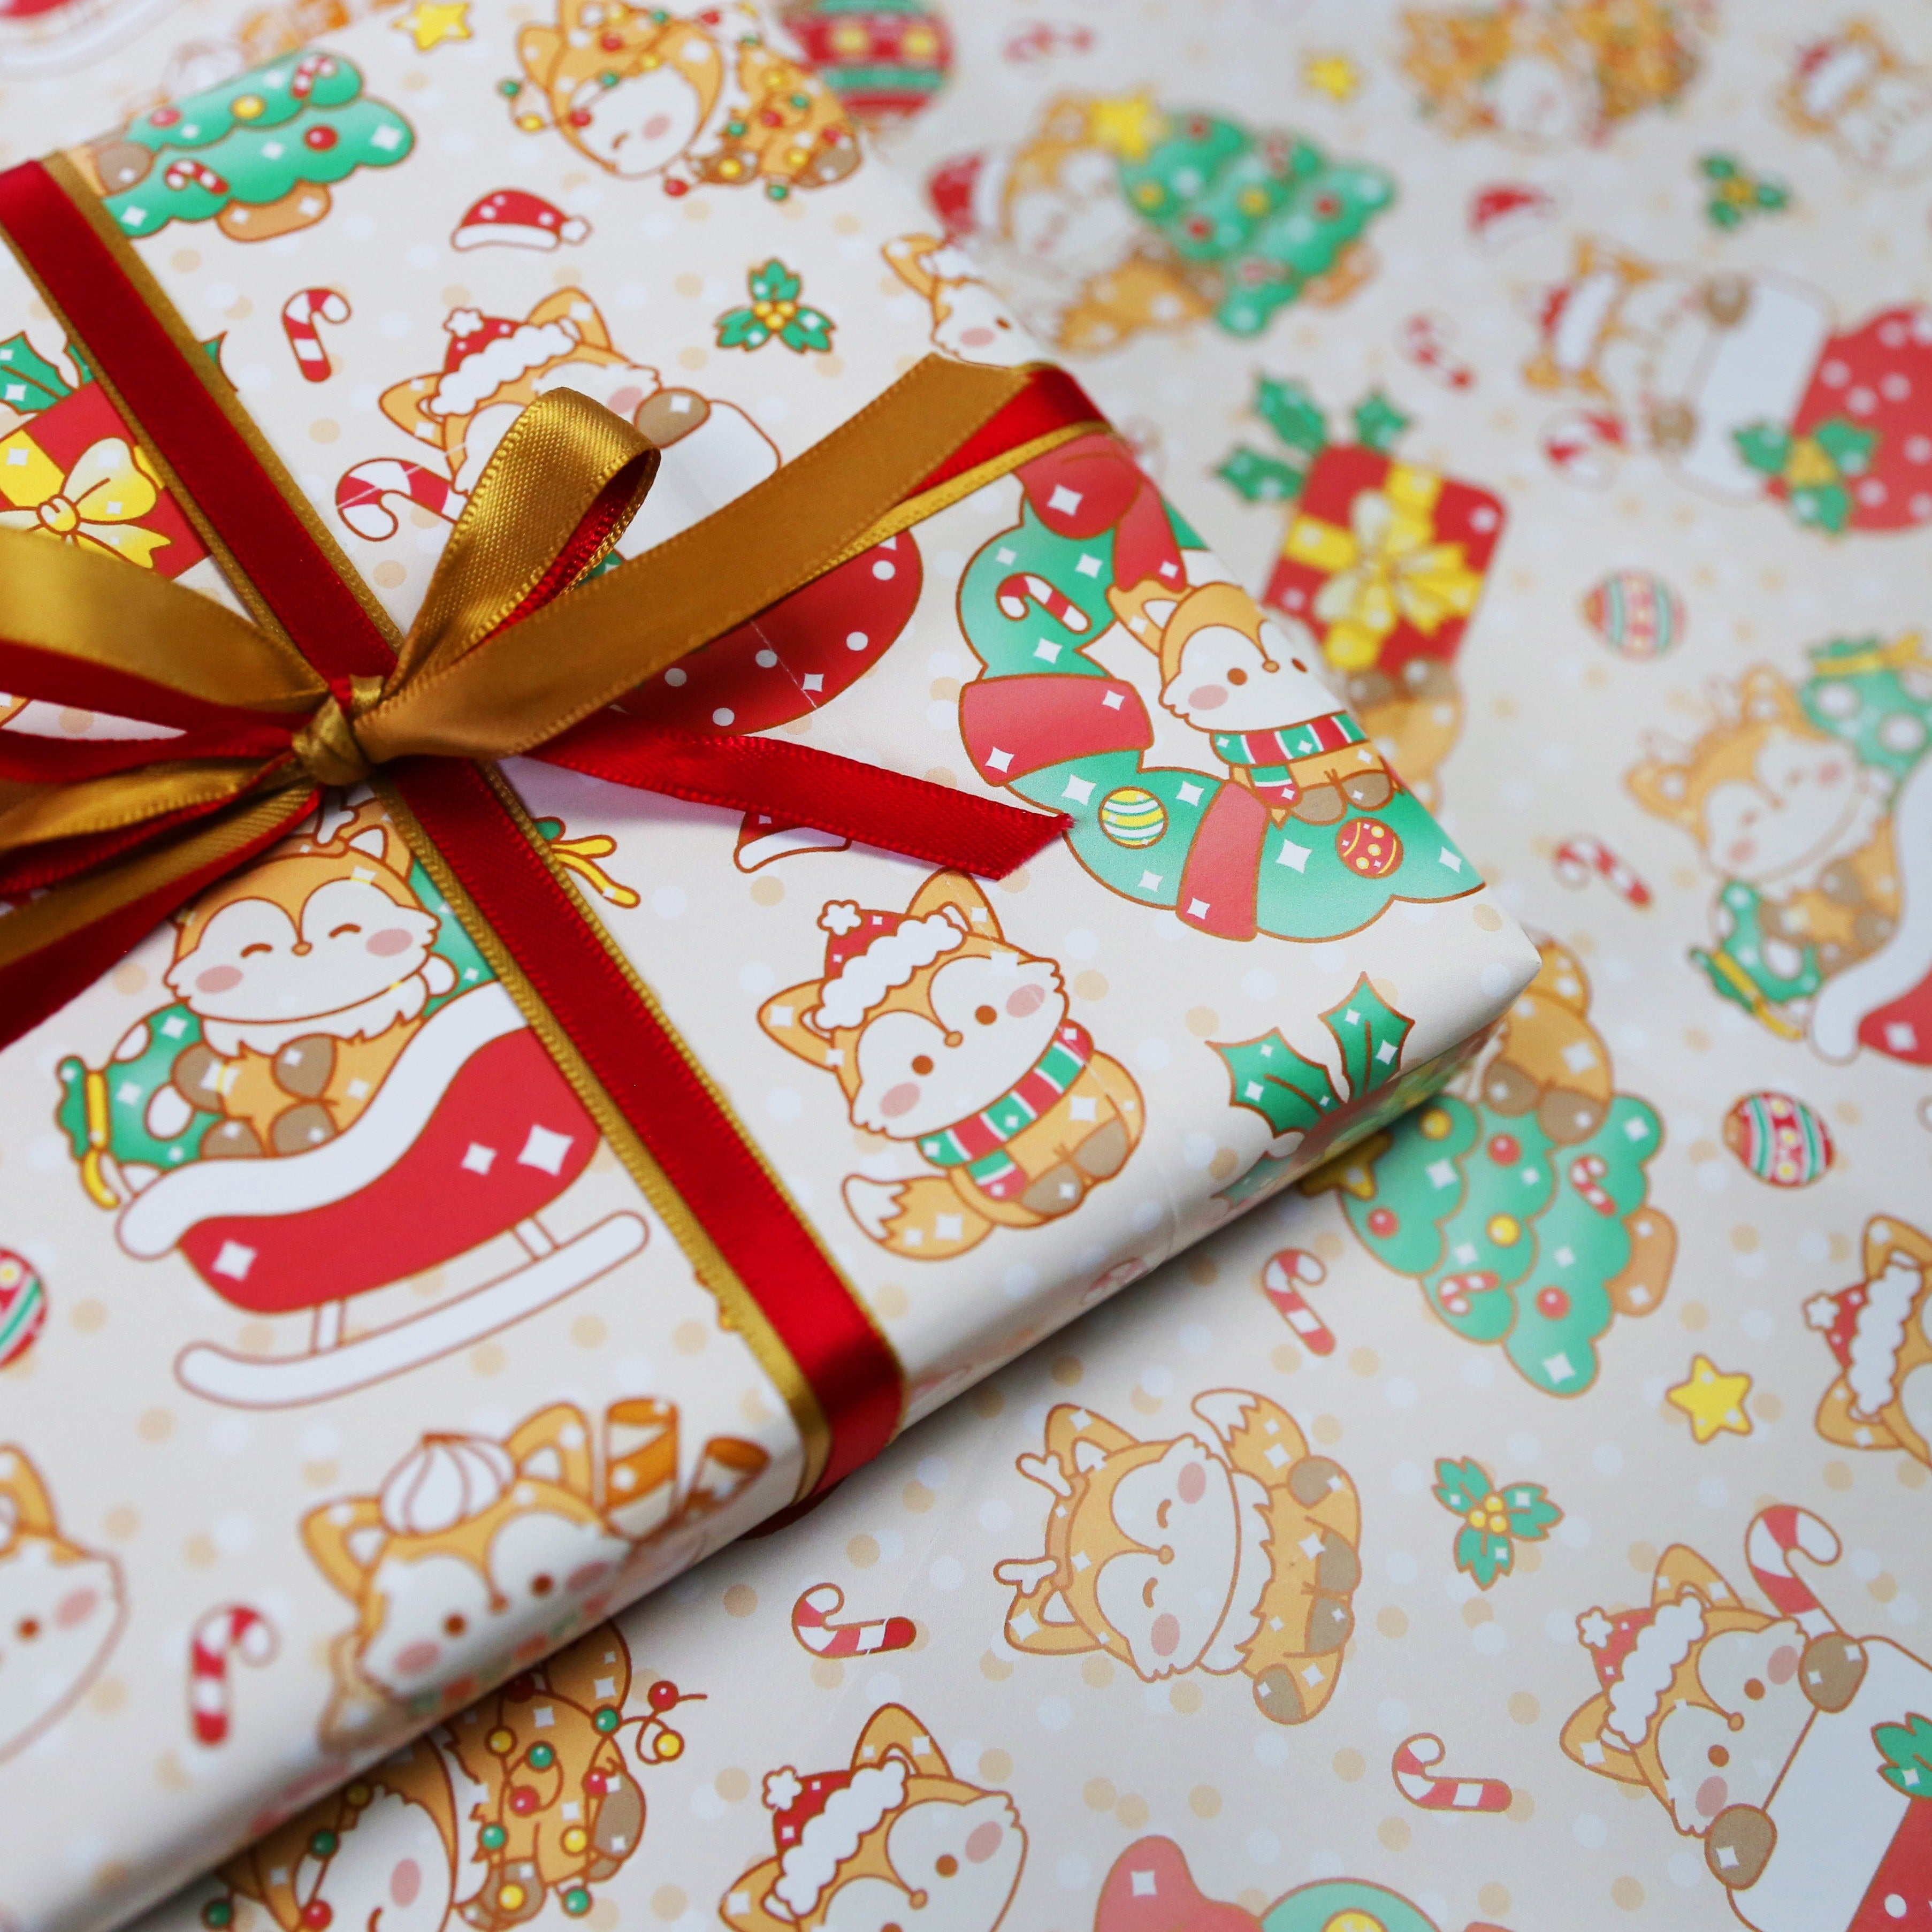 Cute Festive Fox Gift Wrapping Kit